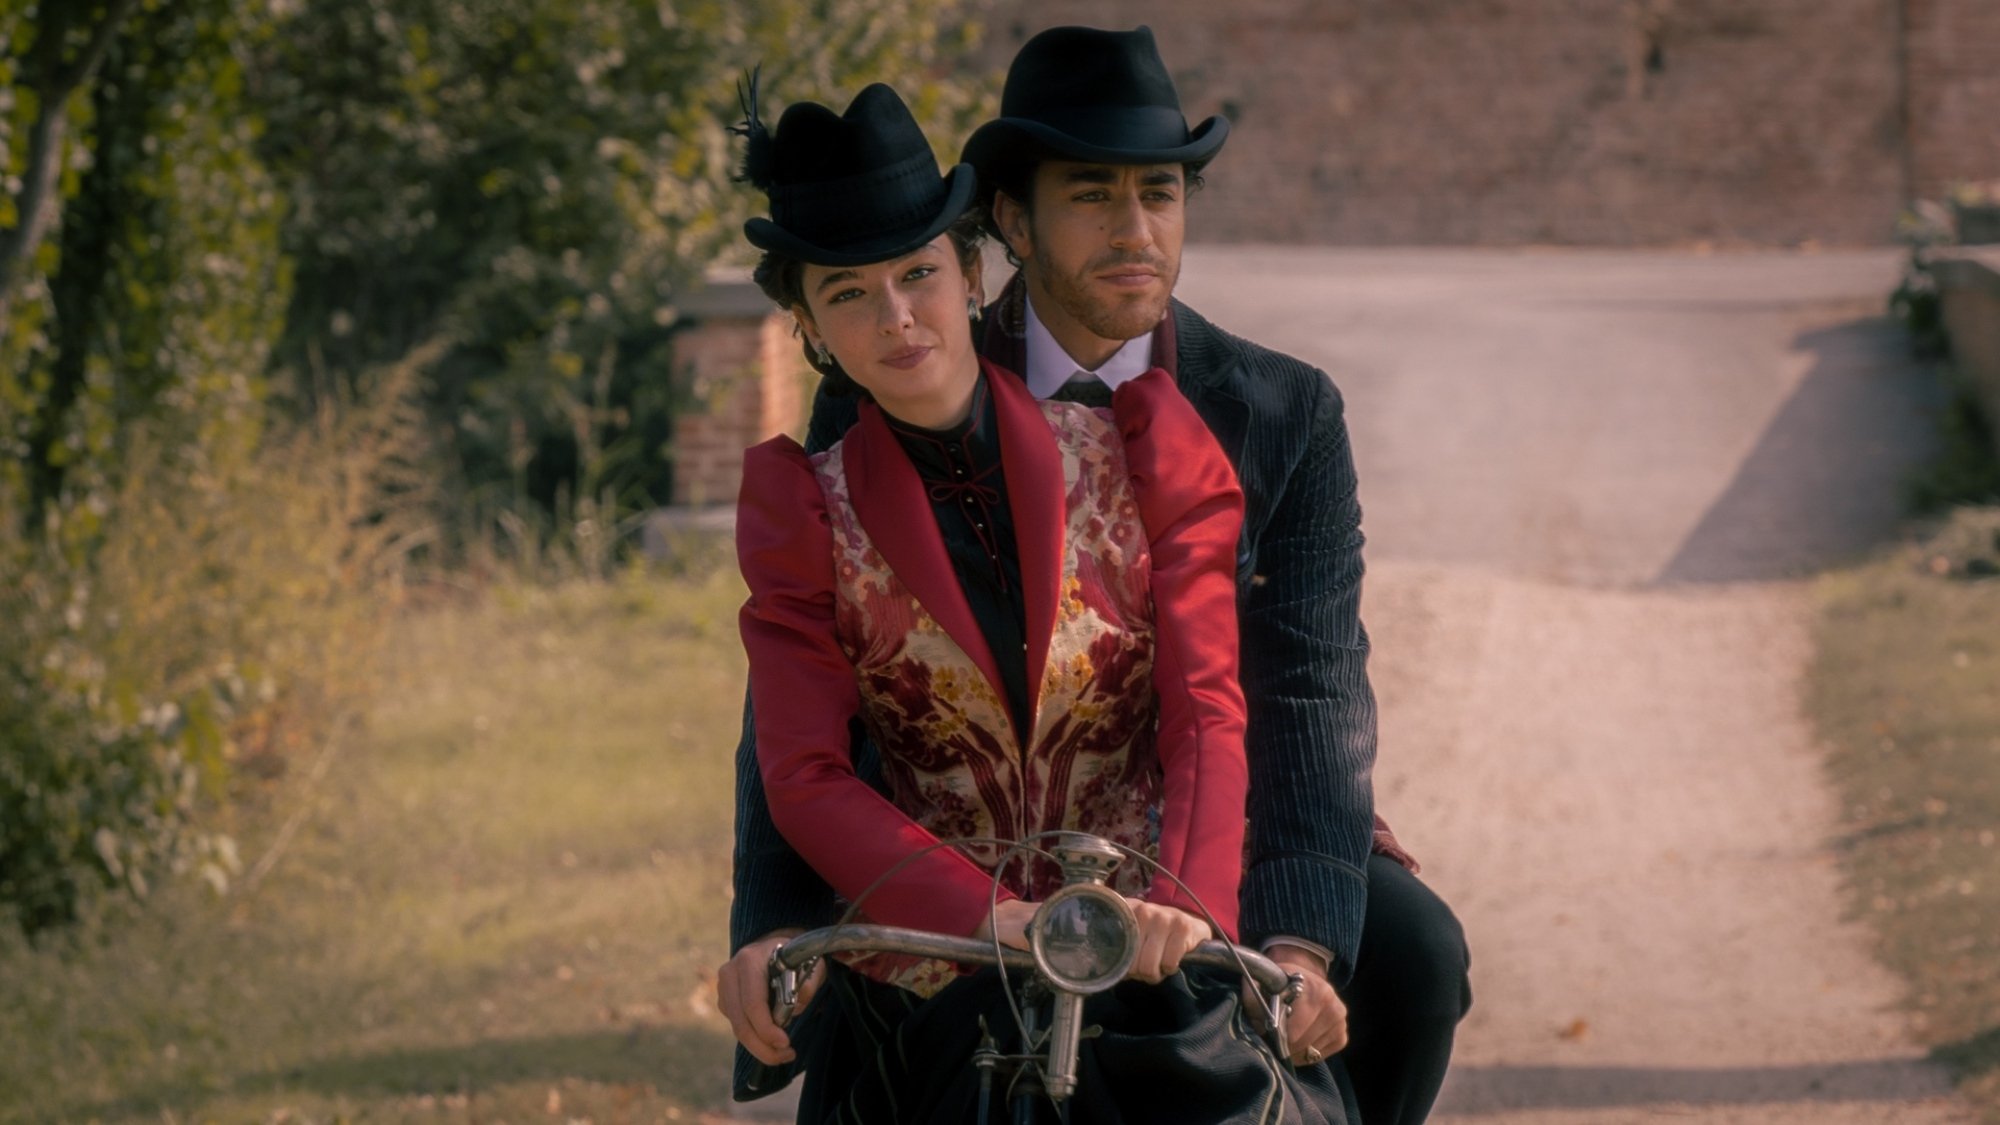 A woman in an old-fashioned red suit and black hat rides on the front of a bicycle driven by a man in a suit and hat.